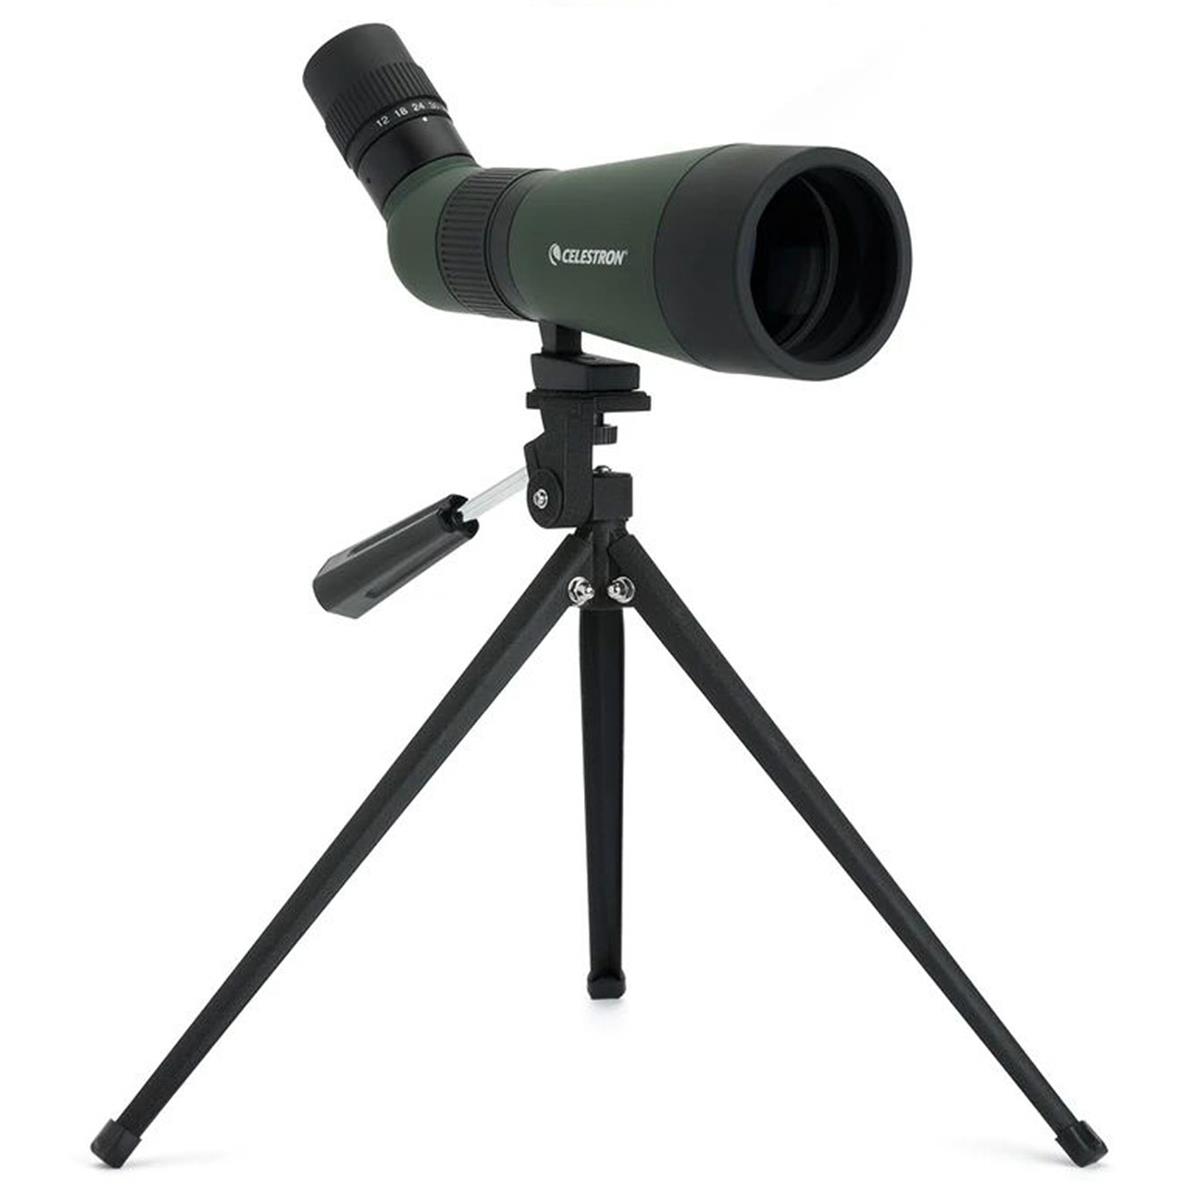 Image of Celestron 12-36x60mm LandScout Angled Spotting Scope with Tripod